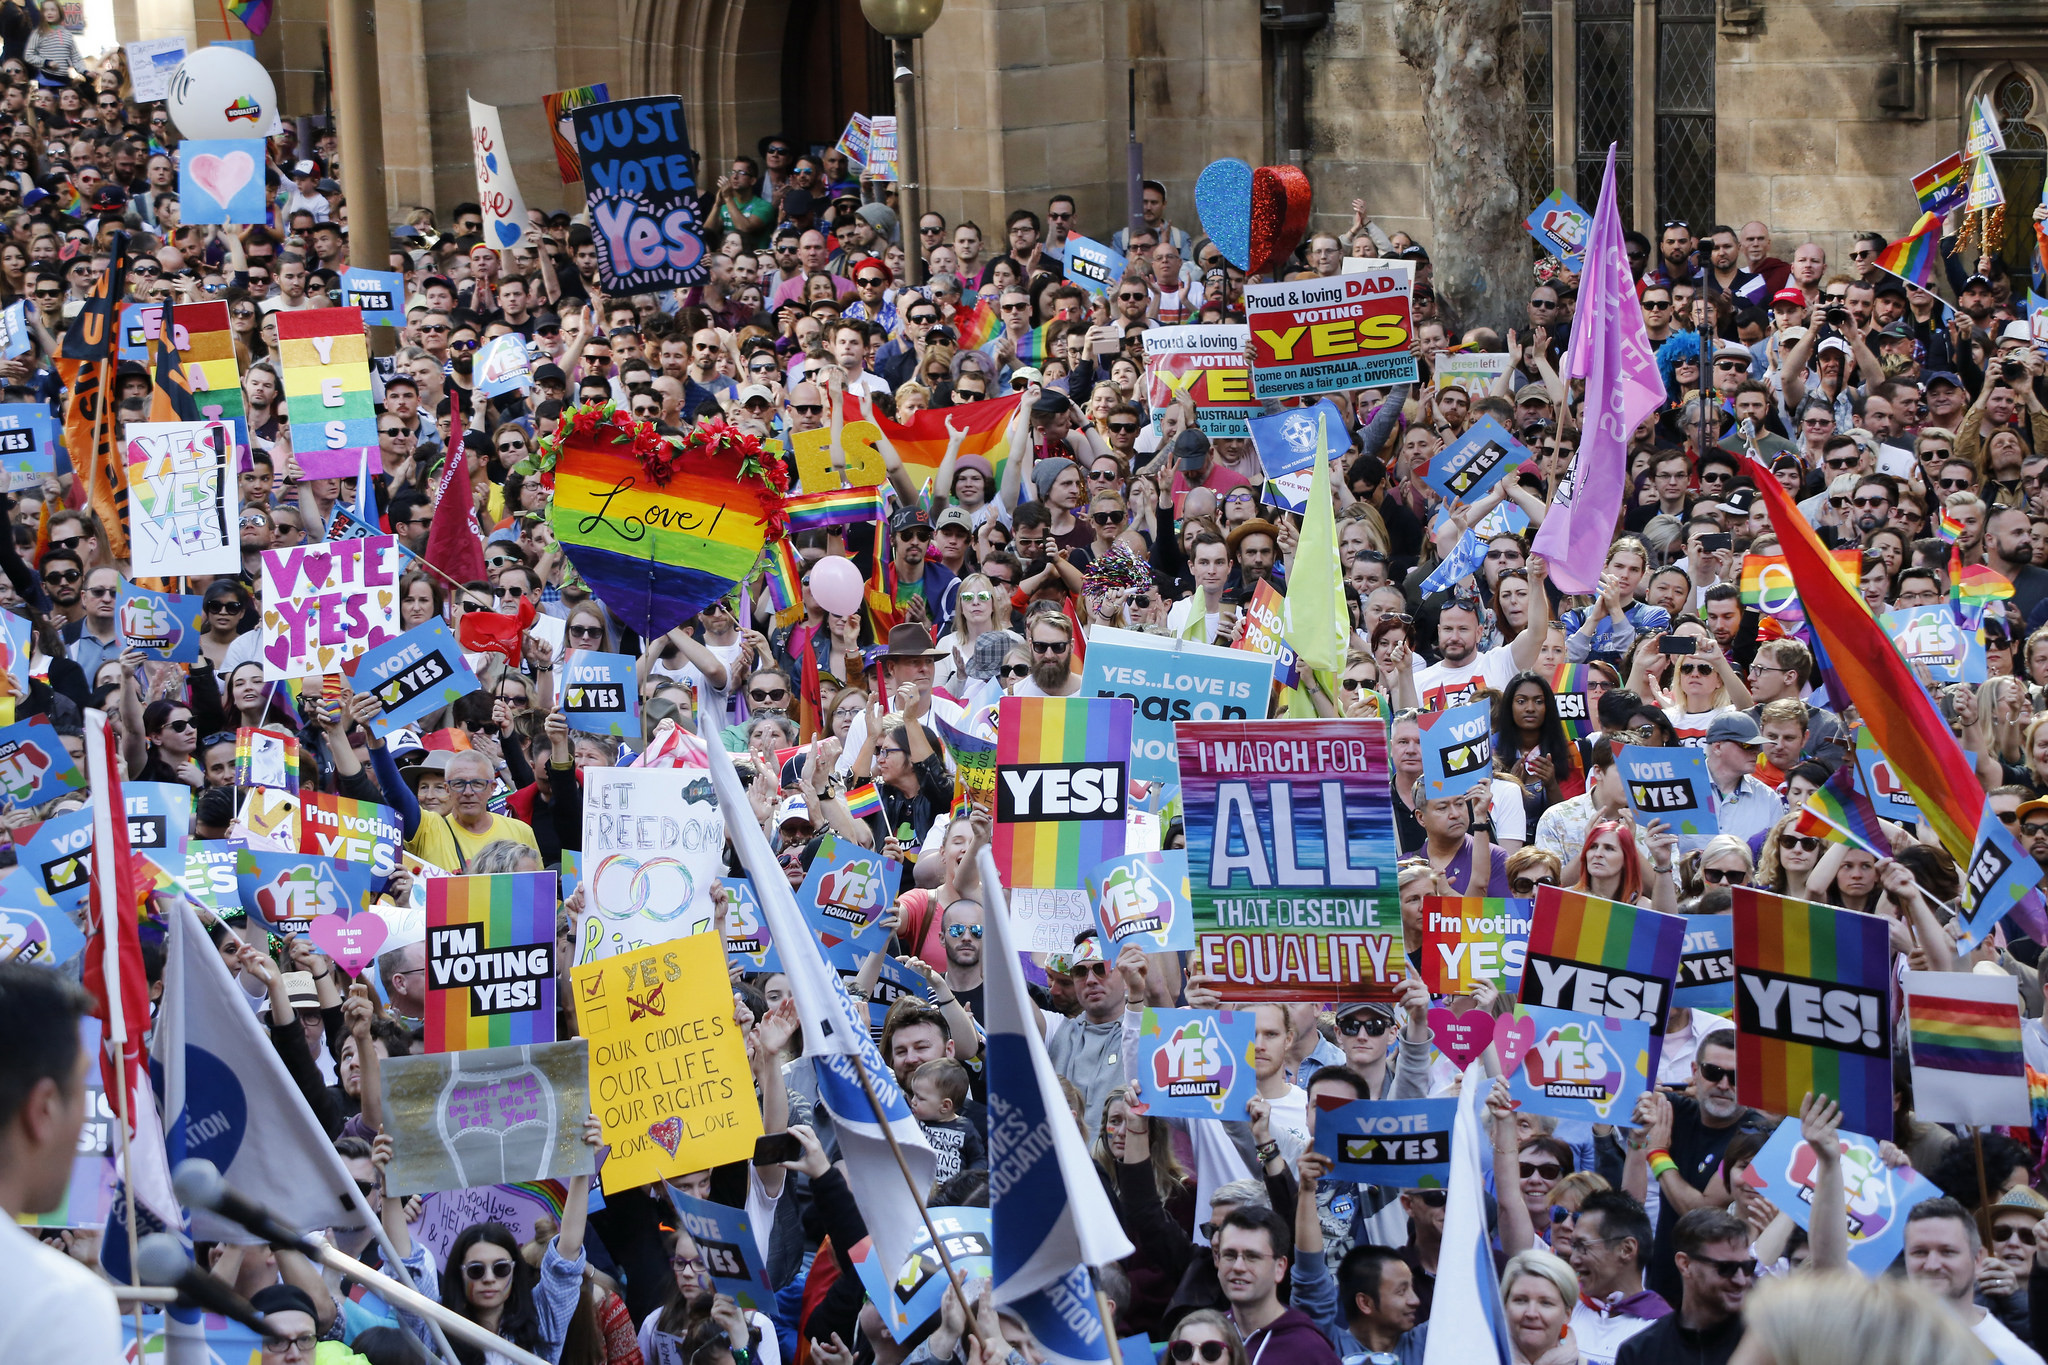 Banning conversion therapy top priority for LGBTI Australians